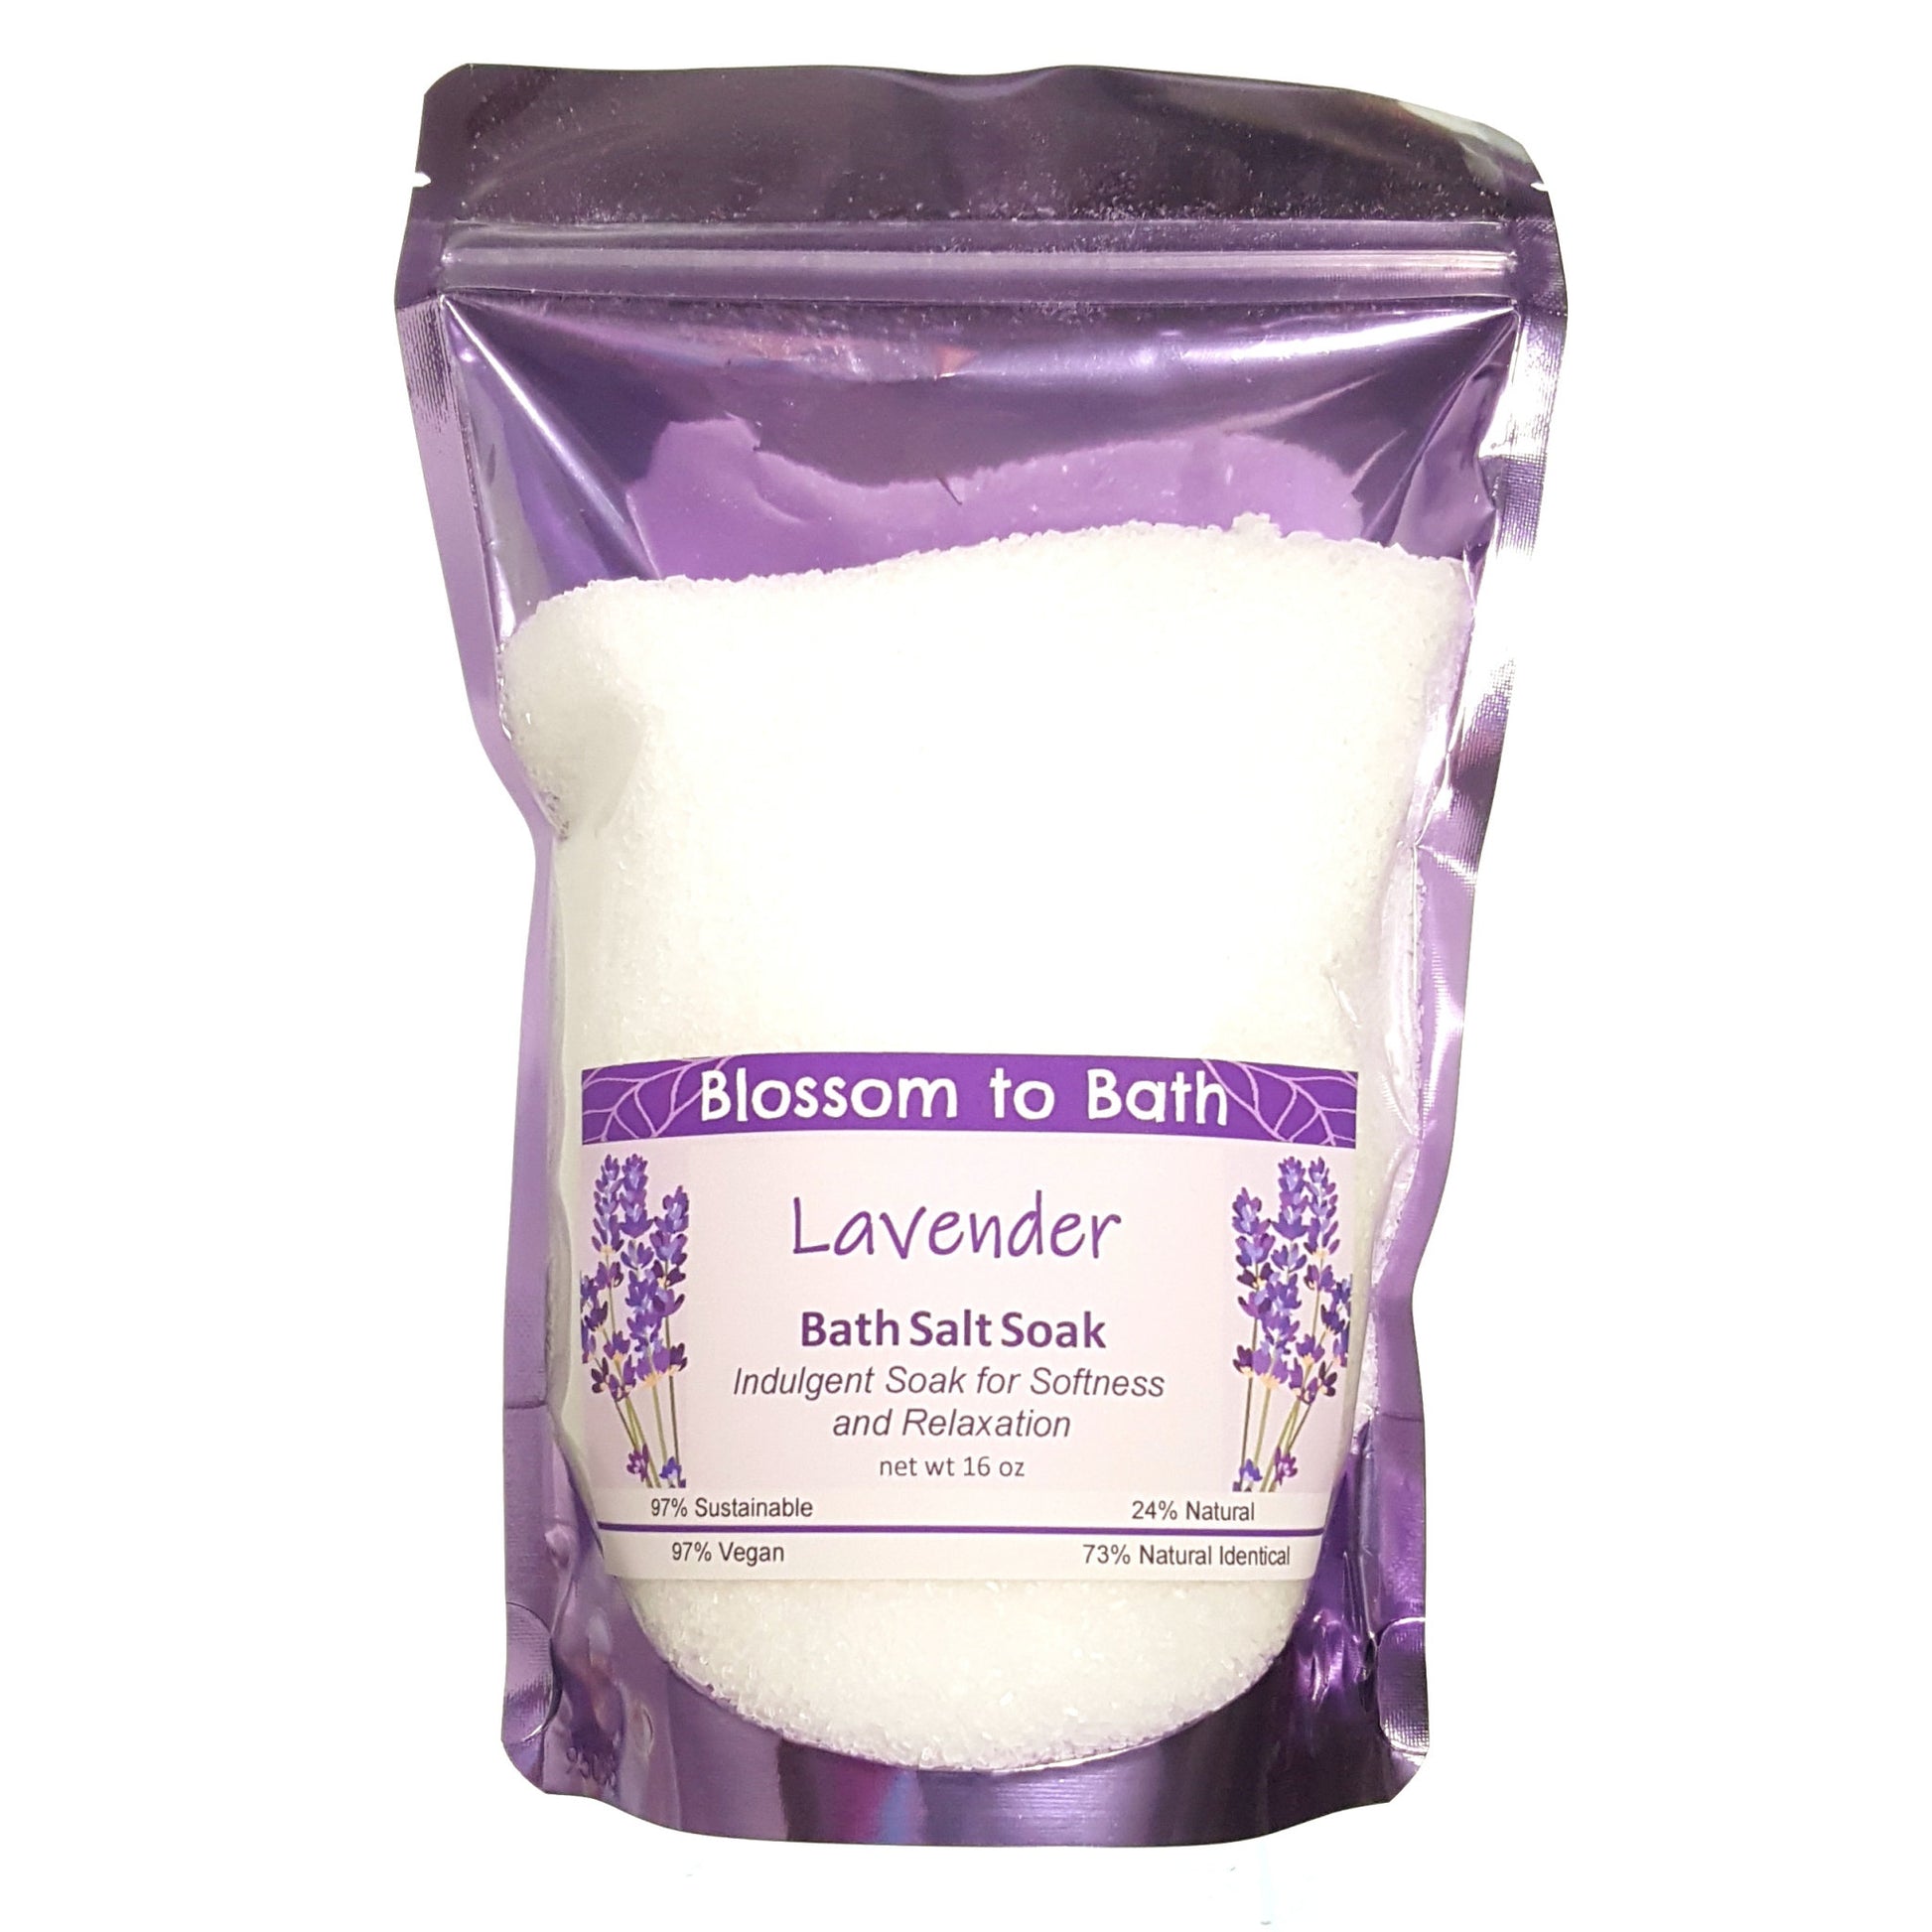 Buy Blossom to Bath Lavender Bath Salt Soak from Flowersong Soap Studio.  Scented epsom salts for a luxurious soaking experience  Classic lavender scent that is relaxing and comforting.